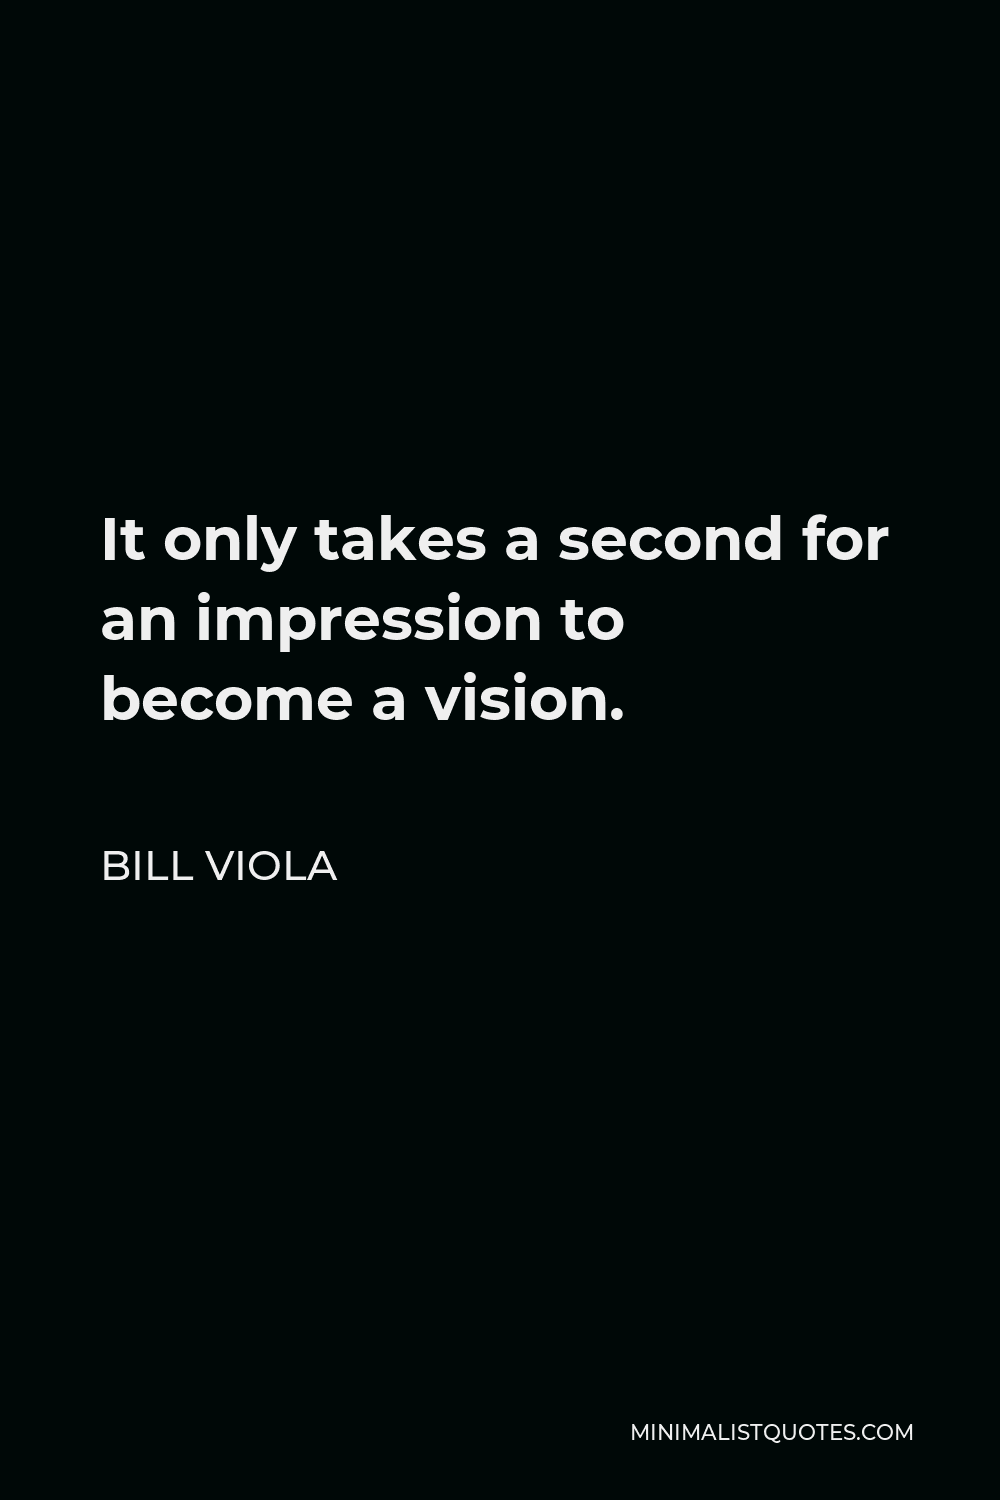 Bill Viola Quote - It only takes a second for an impression to become a vision.